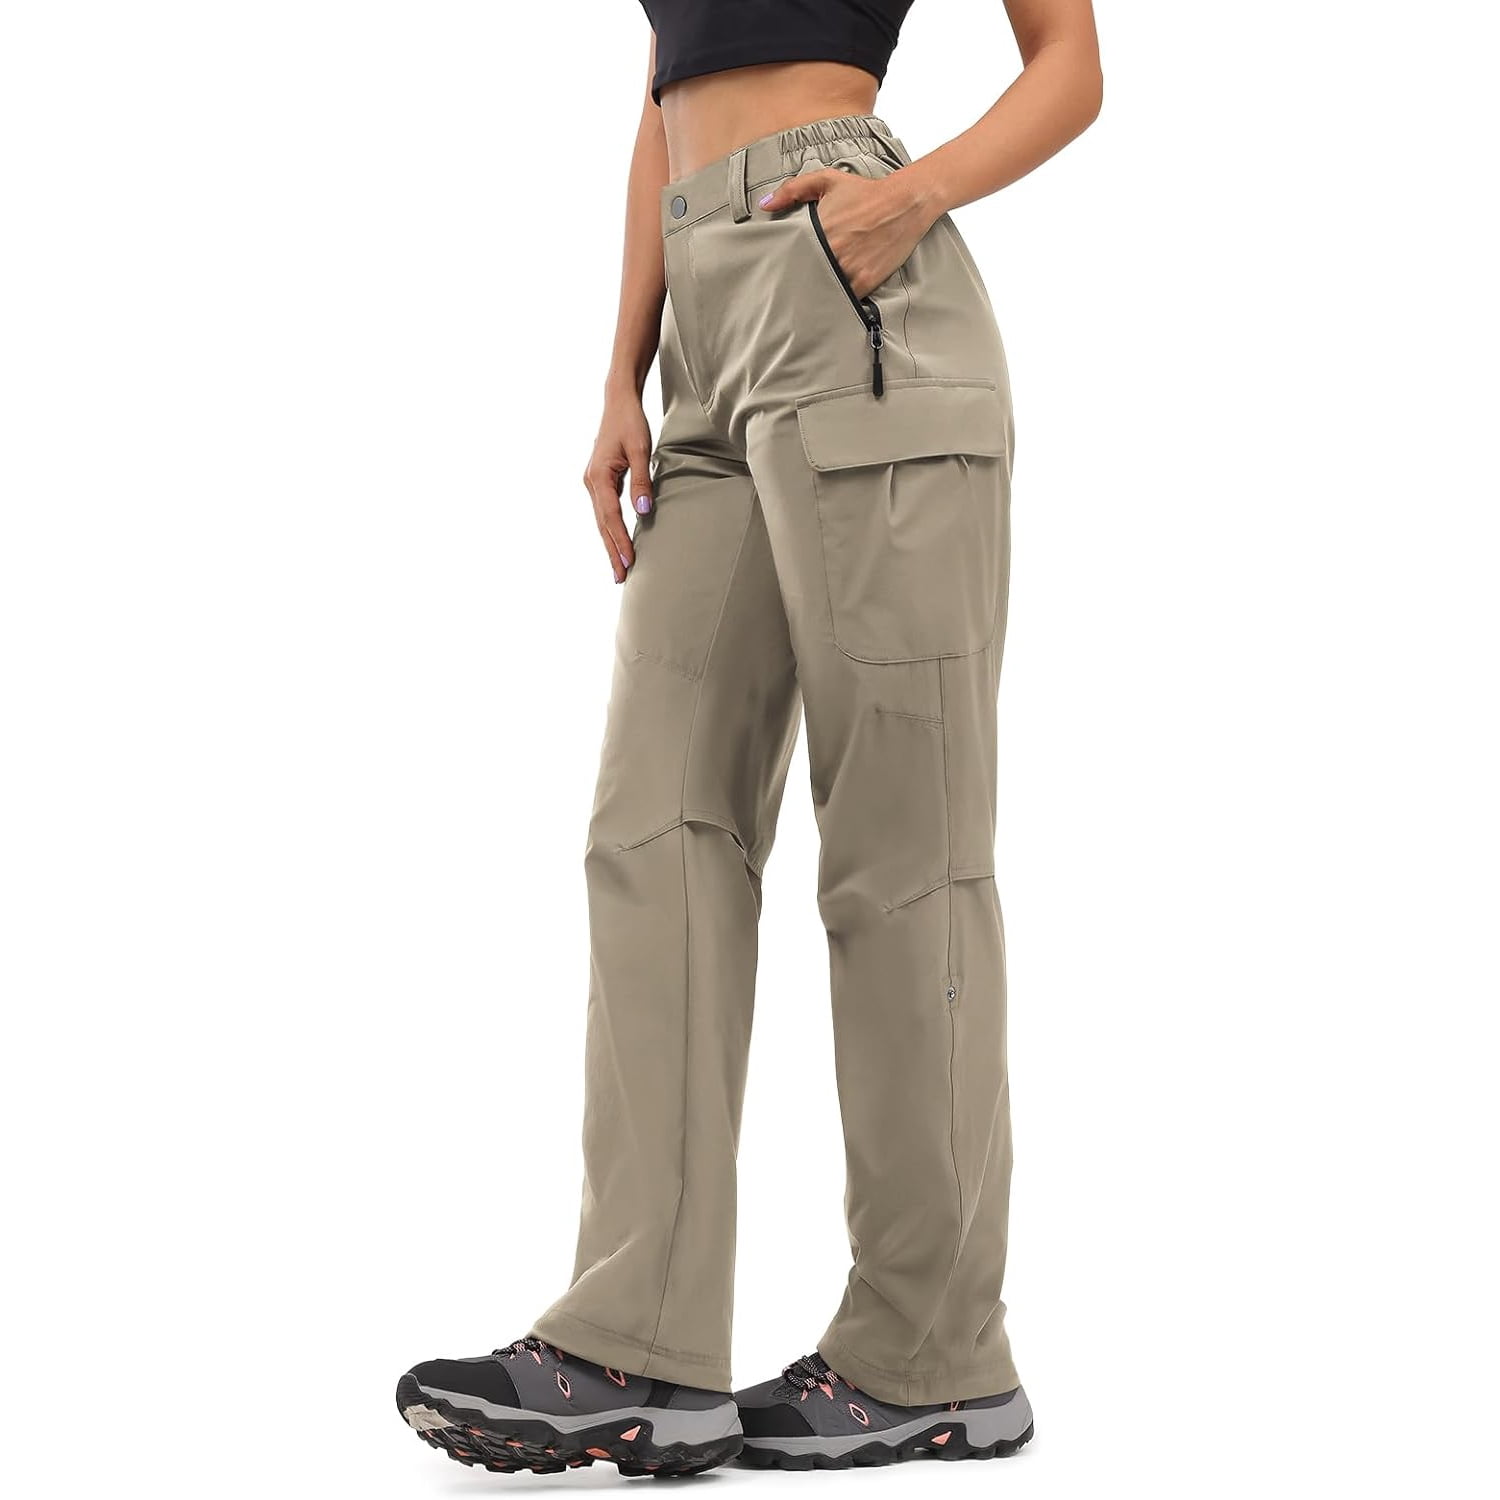  Moosehill Women's-Cargo-Capris-Pants High Waist Waterproof  Hiking Casual Travel Summer Pants for Women with 6 Pockets (Beige,14) :  Clothing, Shoes & Jewelry